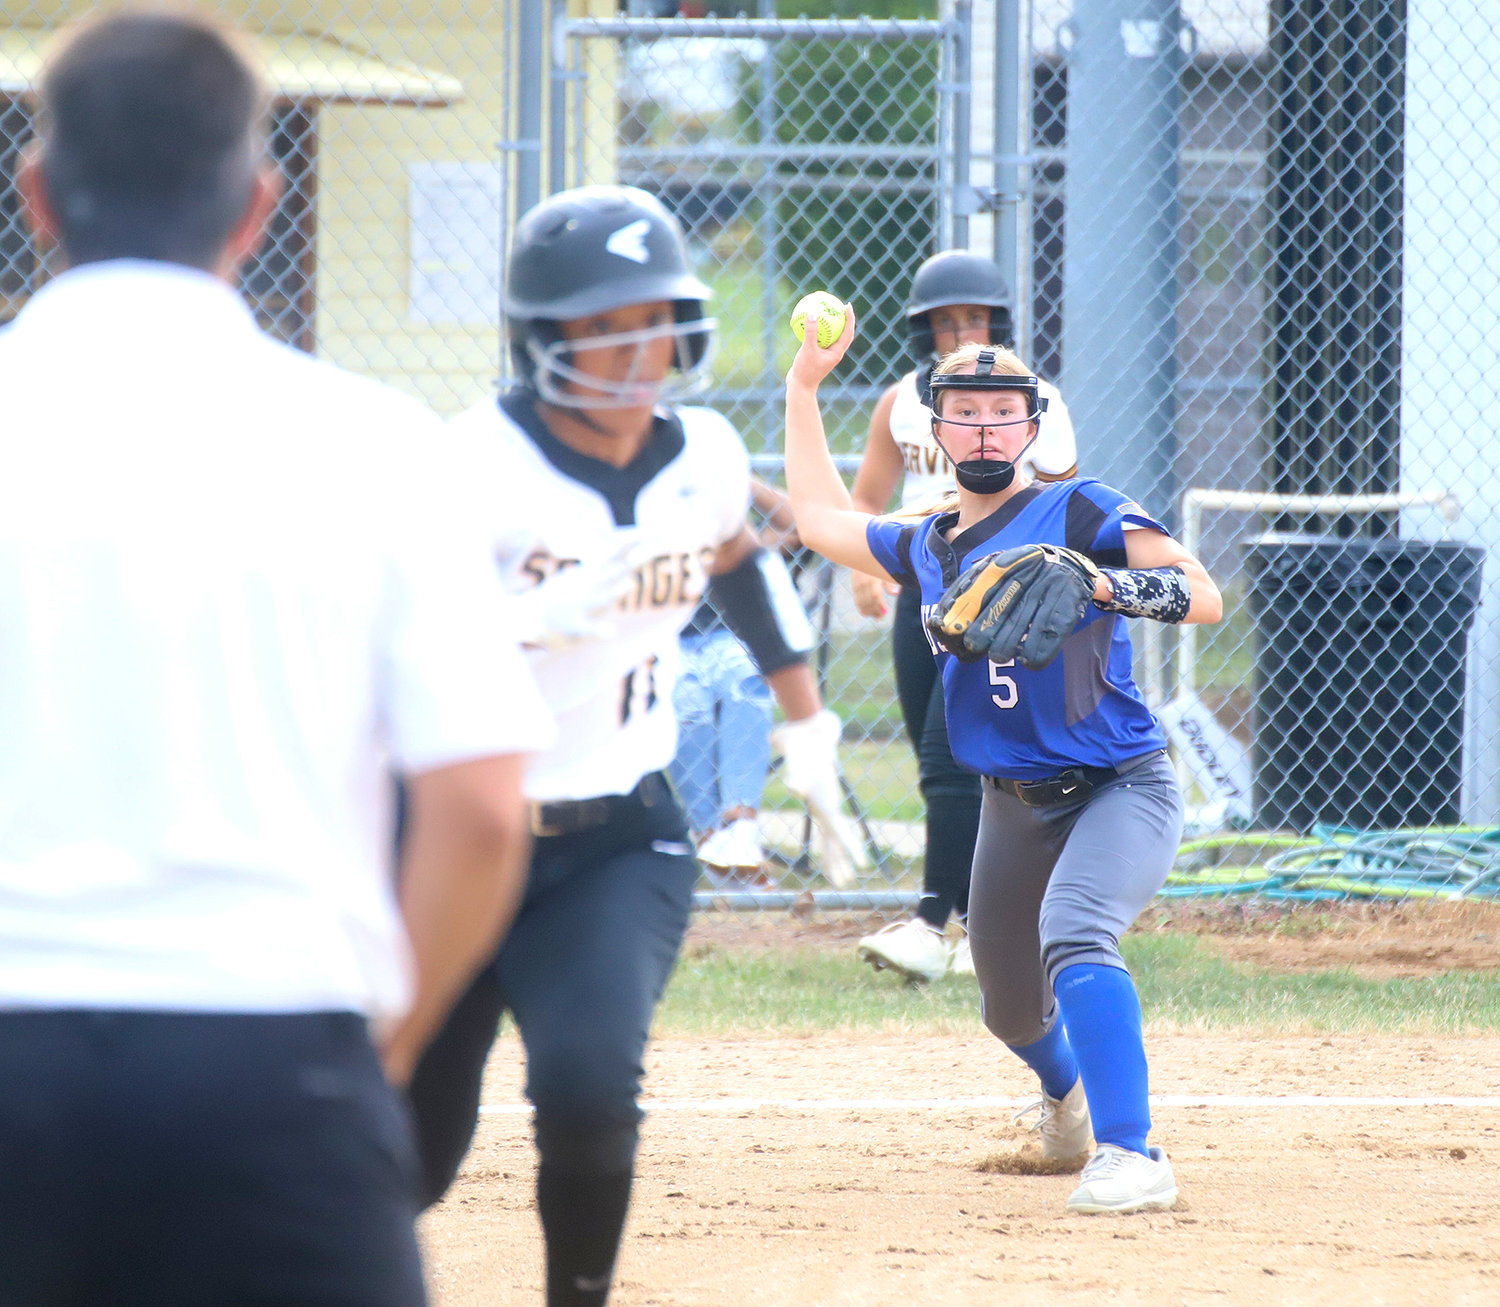 HTC's Kayla Box (5) comes up throwing after Sigourney's Amiya Smallwood (11) tried to bunt her way on in the second inning.